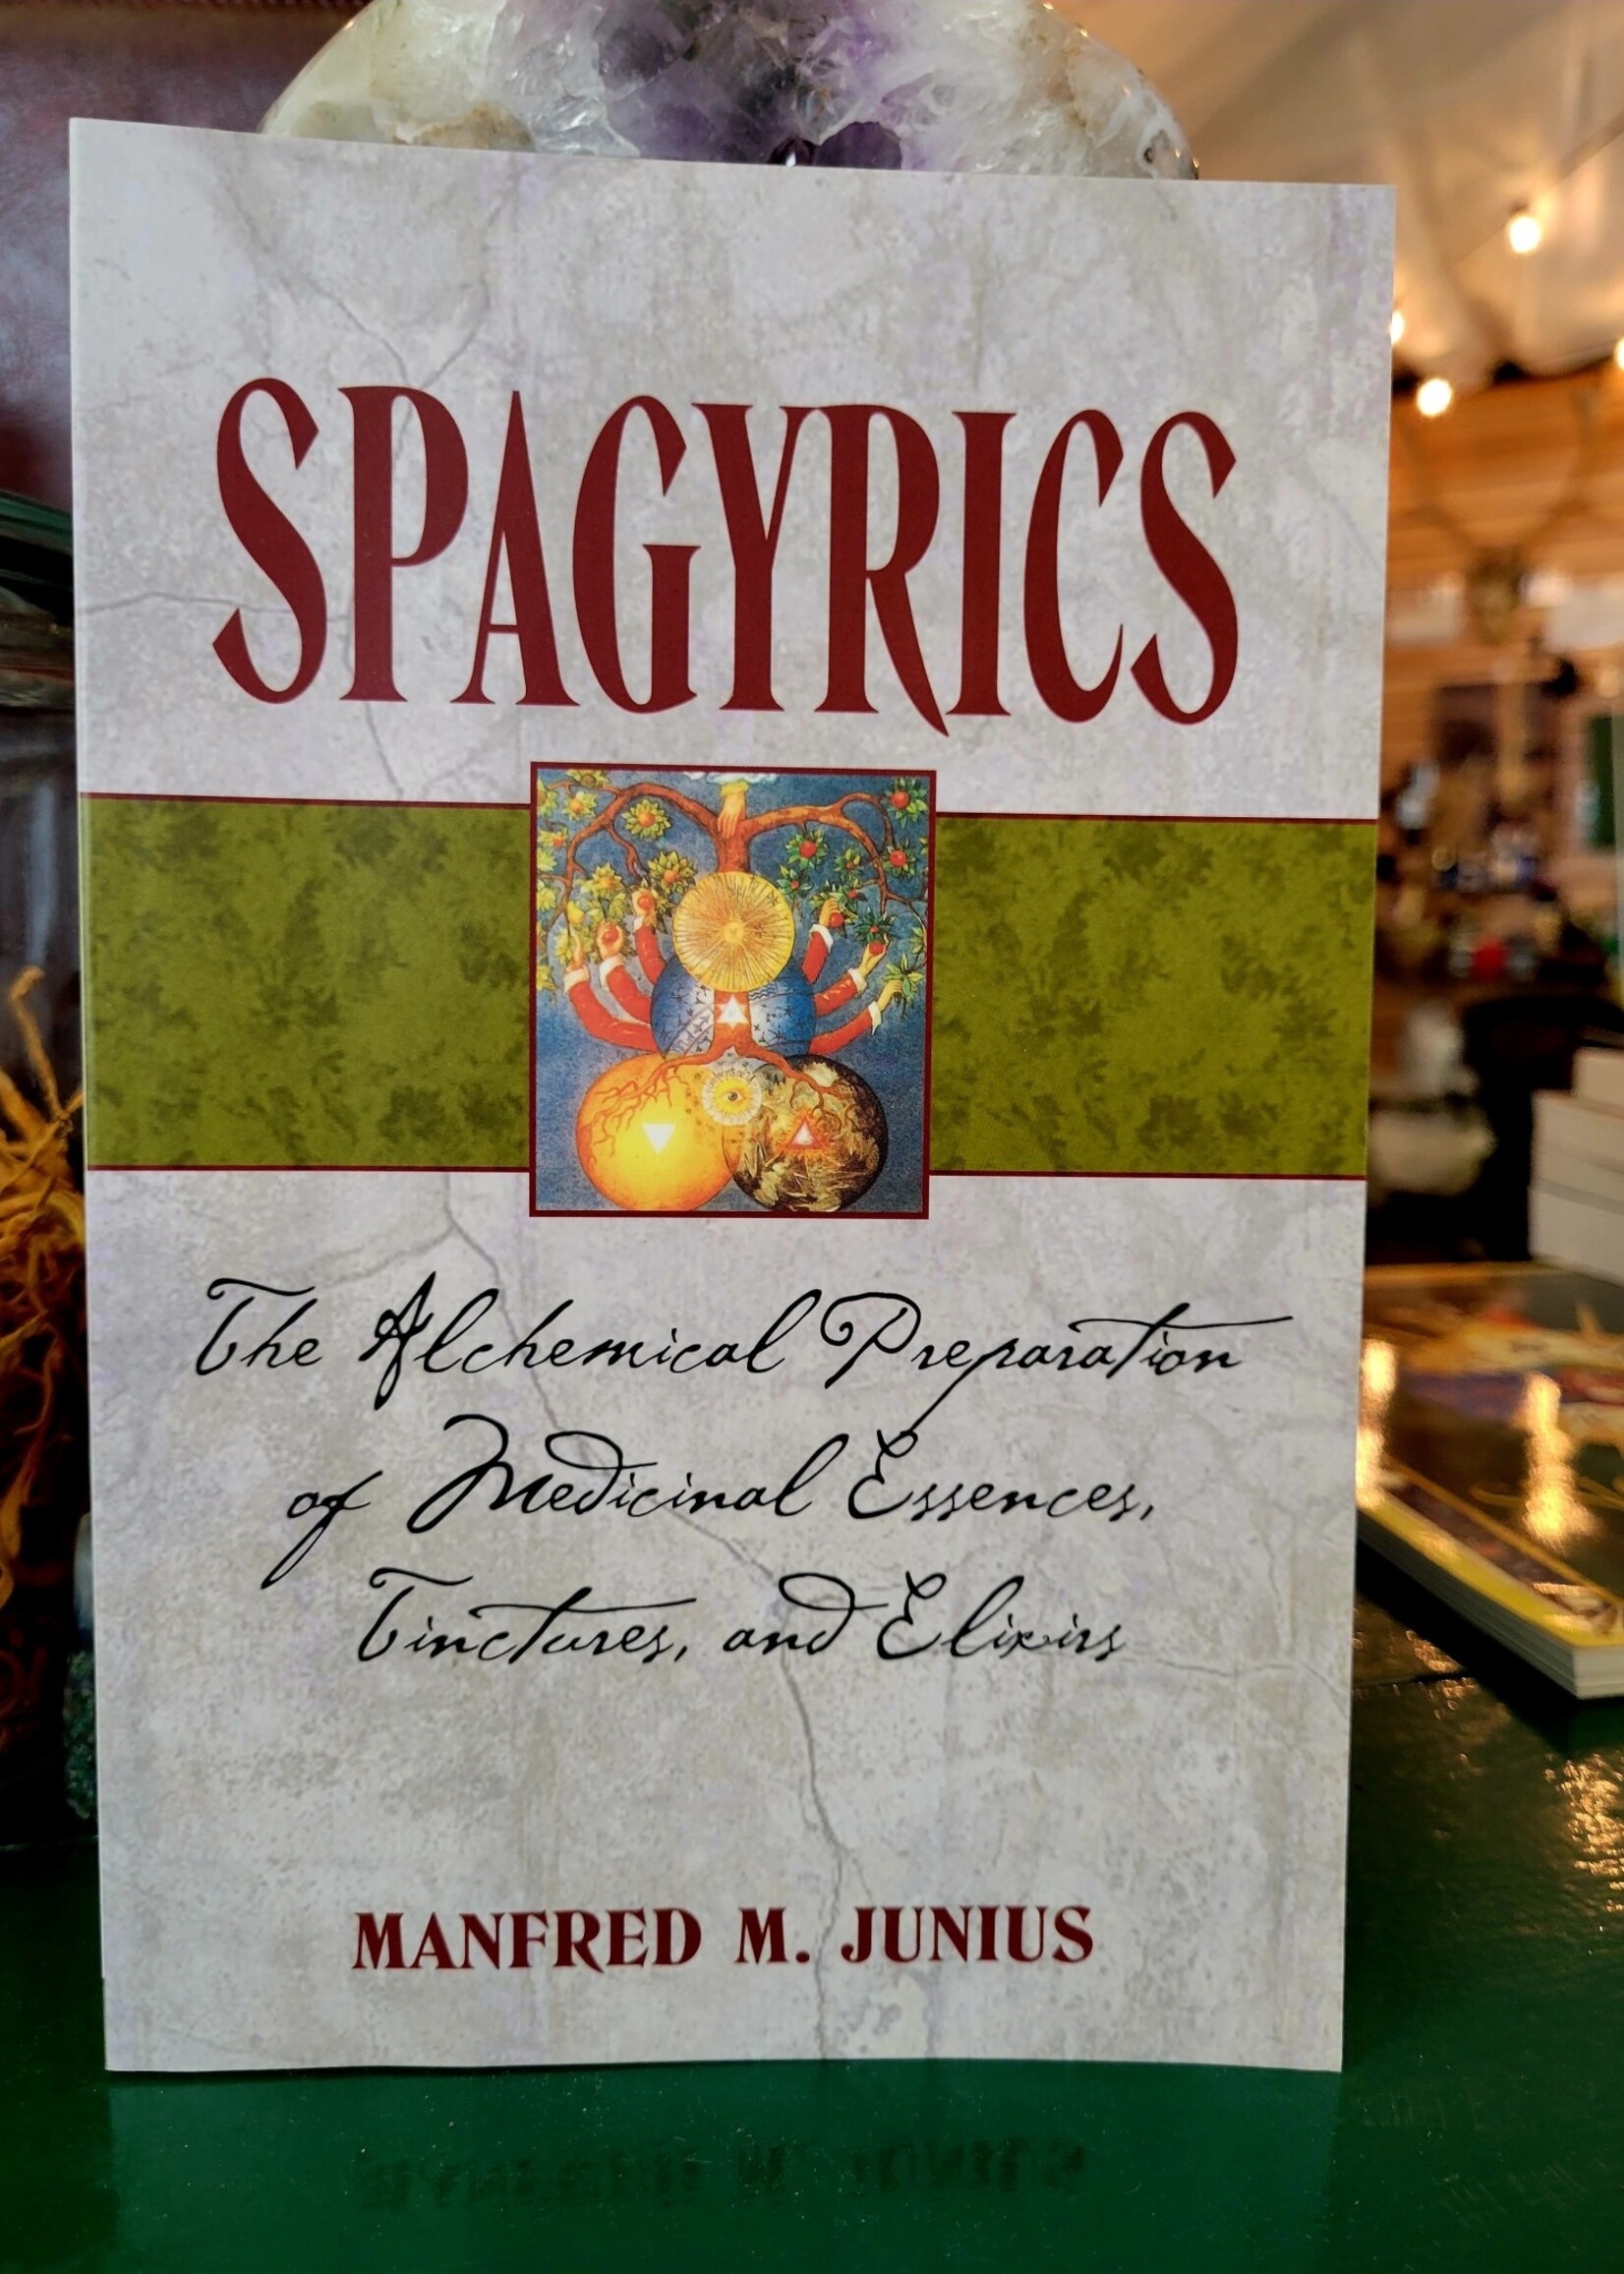 Spagyrics The Alchemical Preparation of Medicinal Essences, Tinctures, and Elixirs  - By (Author) Manfred M. Junius